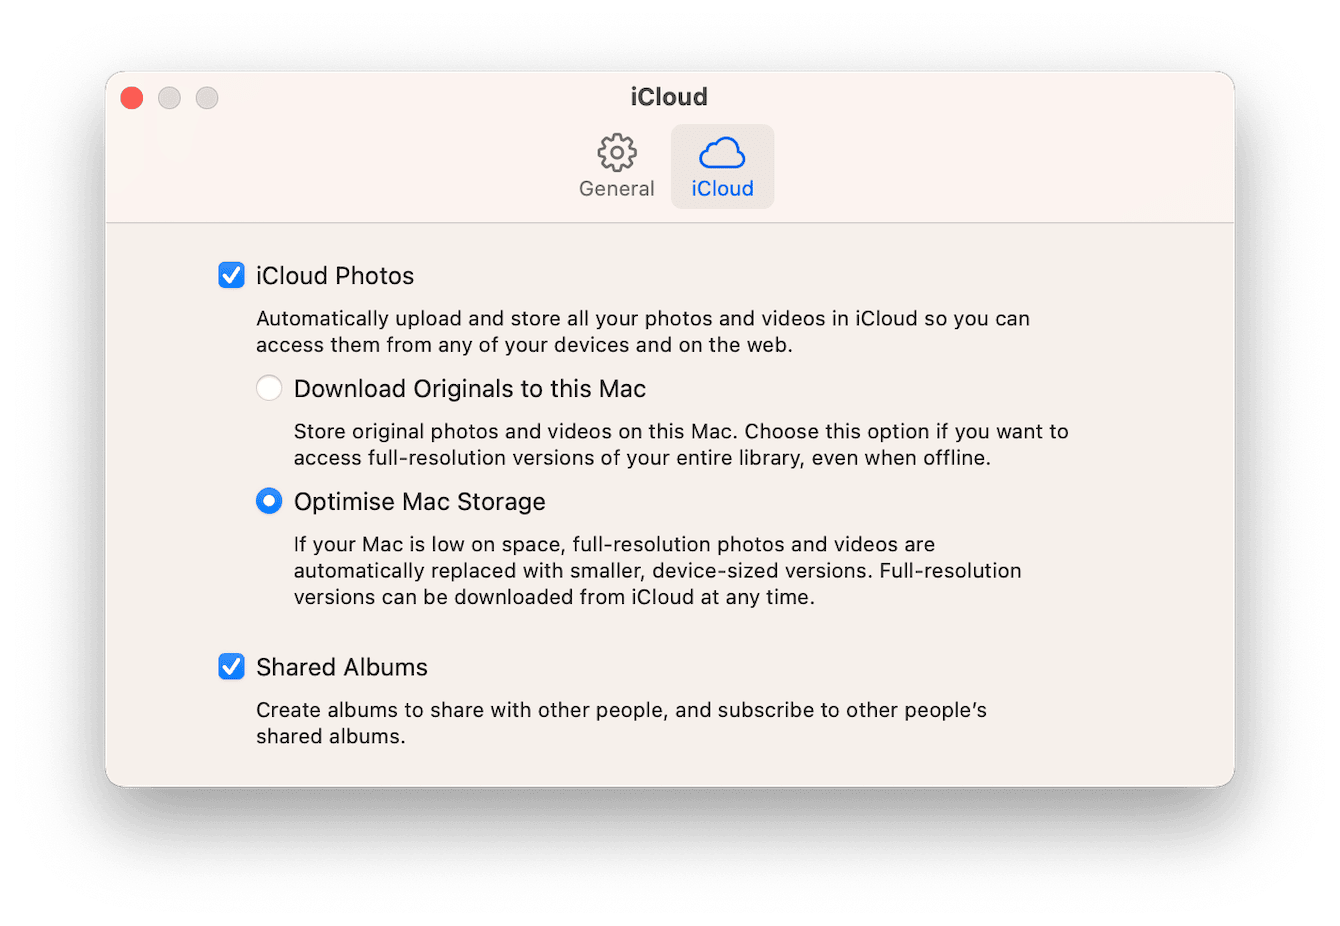 Syncing videos with iCloud